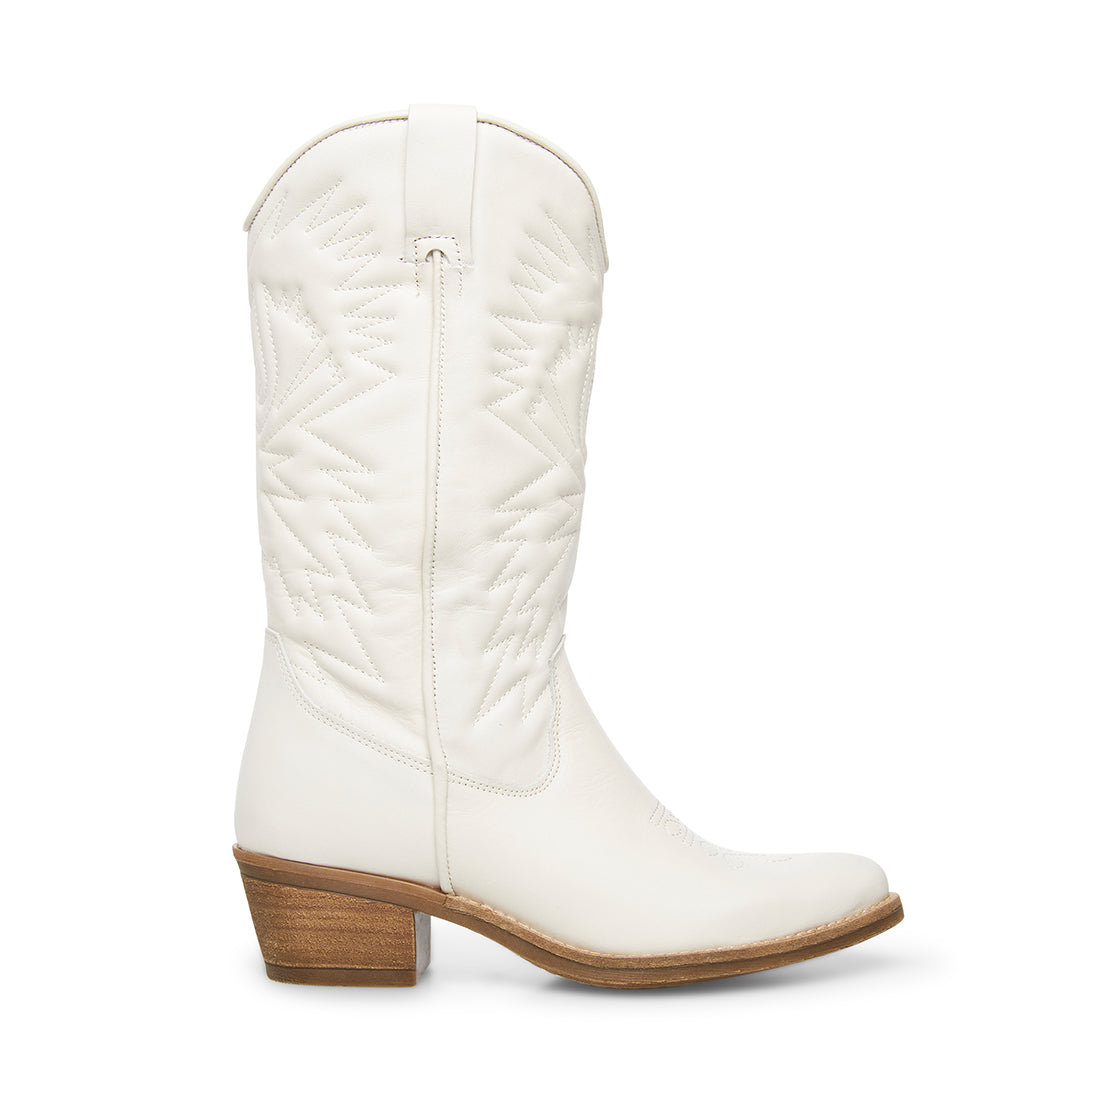 HAYWARD White Leather Western Cowboy Boots